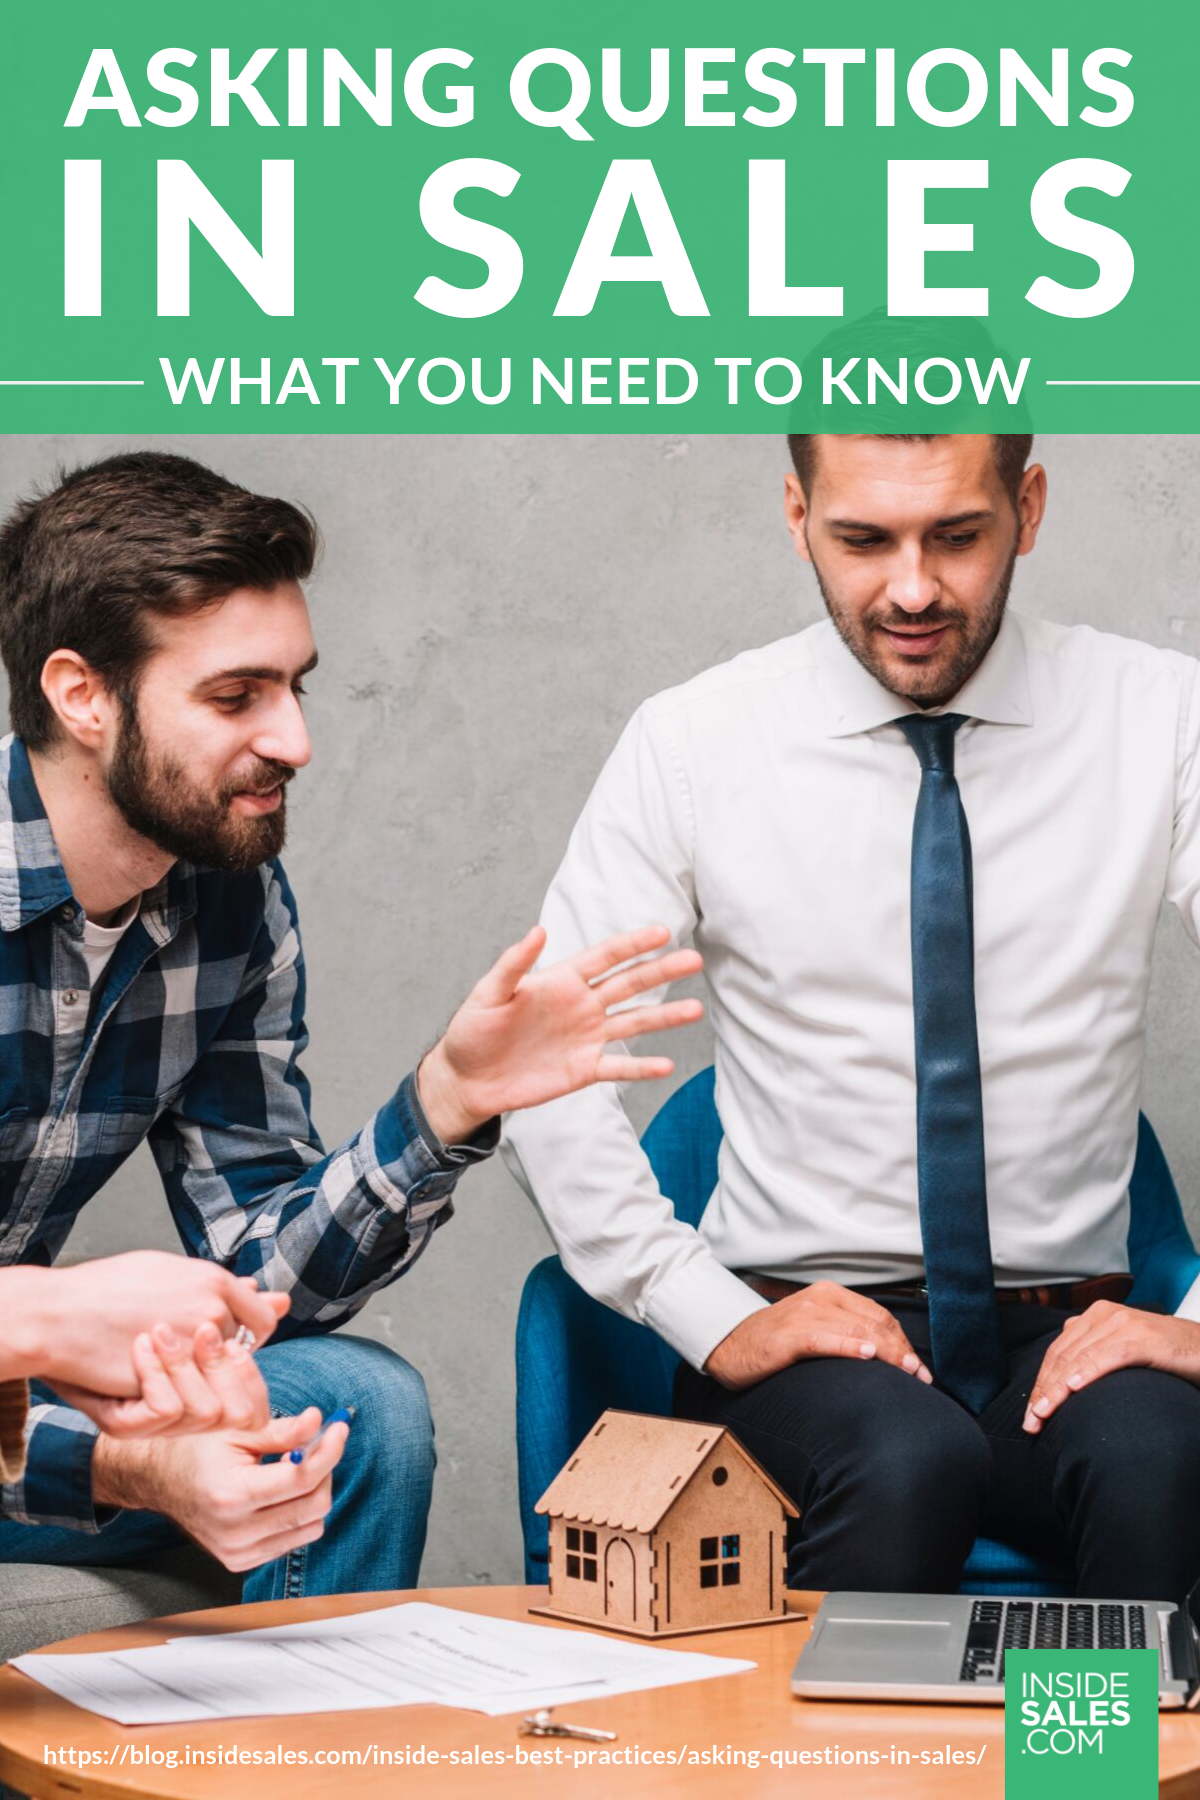 Why Asking Questions in Sales is Important https://www.insidesales.com/blog/inside-sales-best-practices/asking-questions-in-sales/